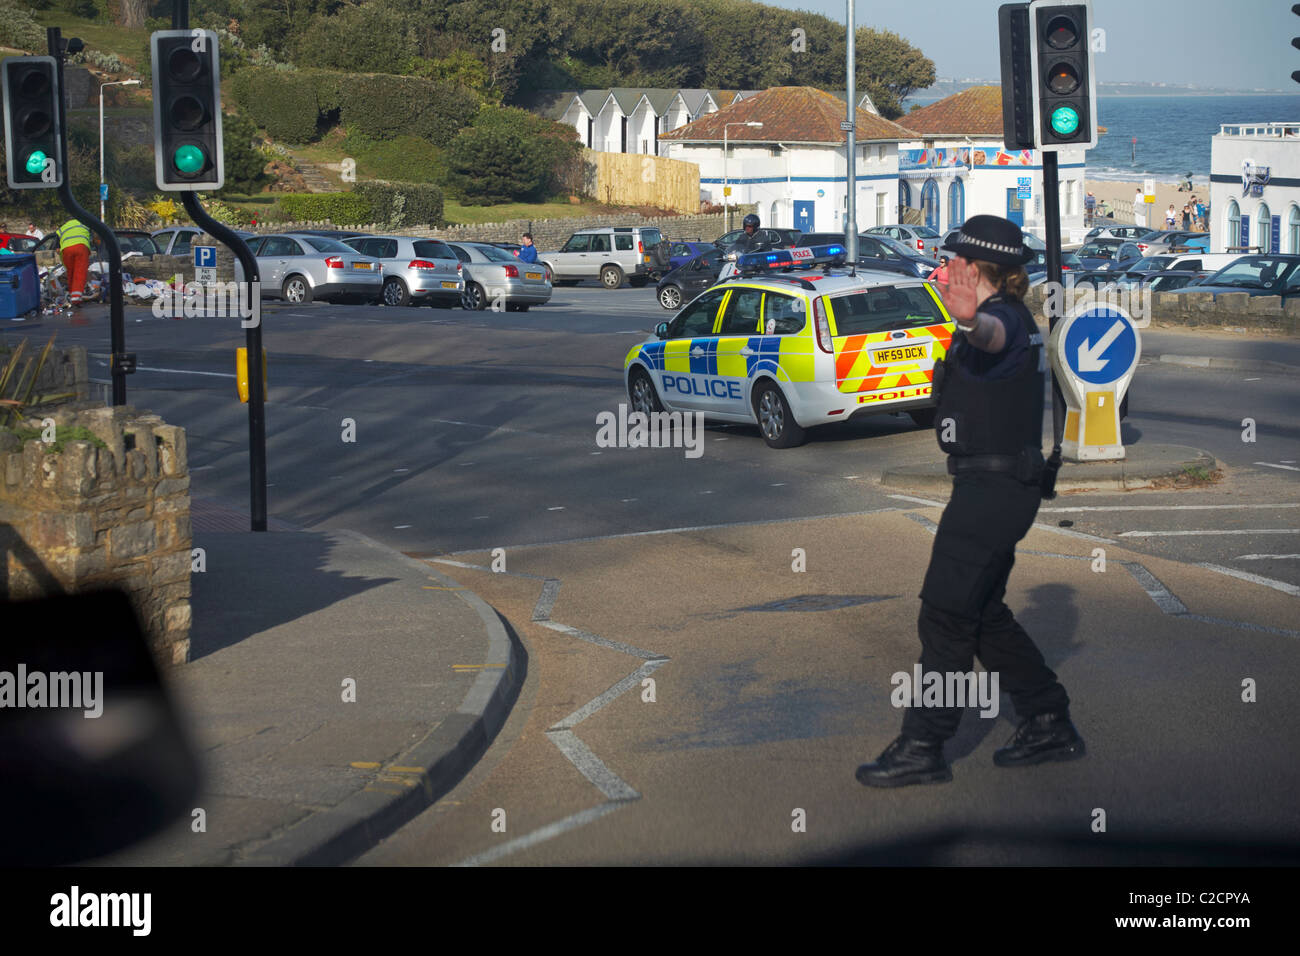 Police woman stopped car due to incident with rubbish strewn across pavement and road being cleared up at Branksome Chine, April Stock Photo